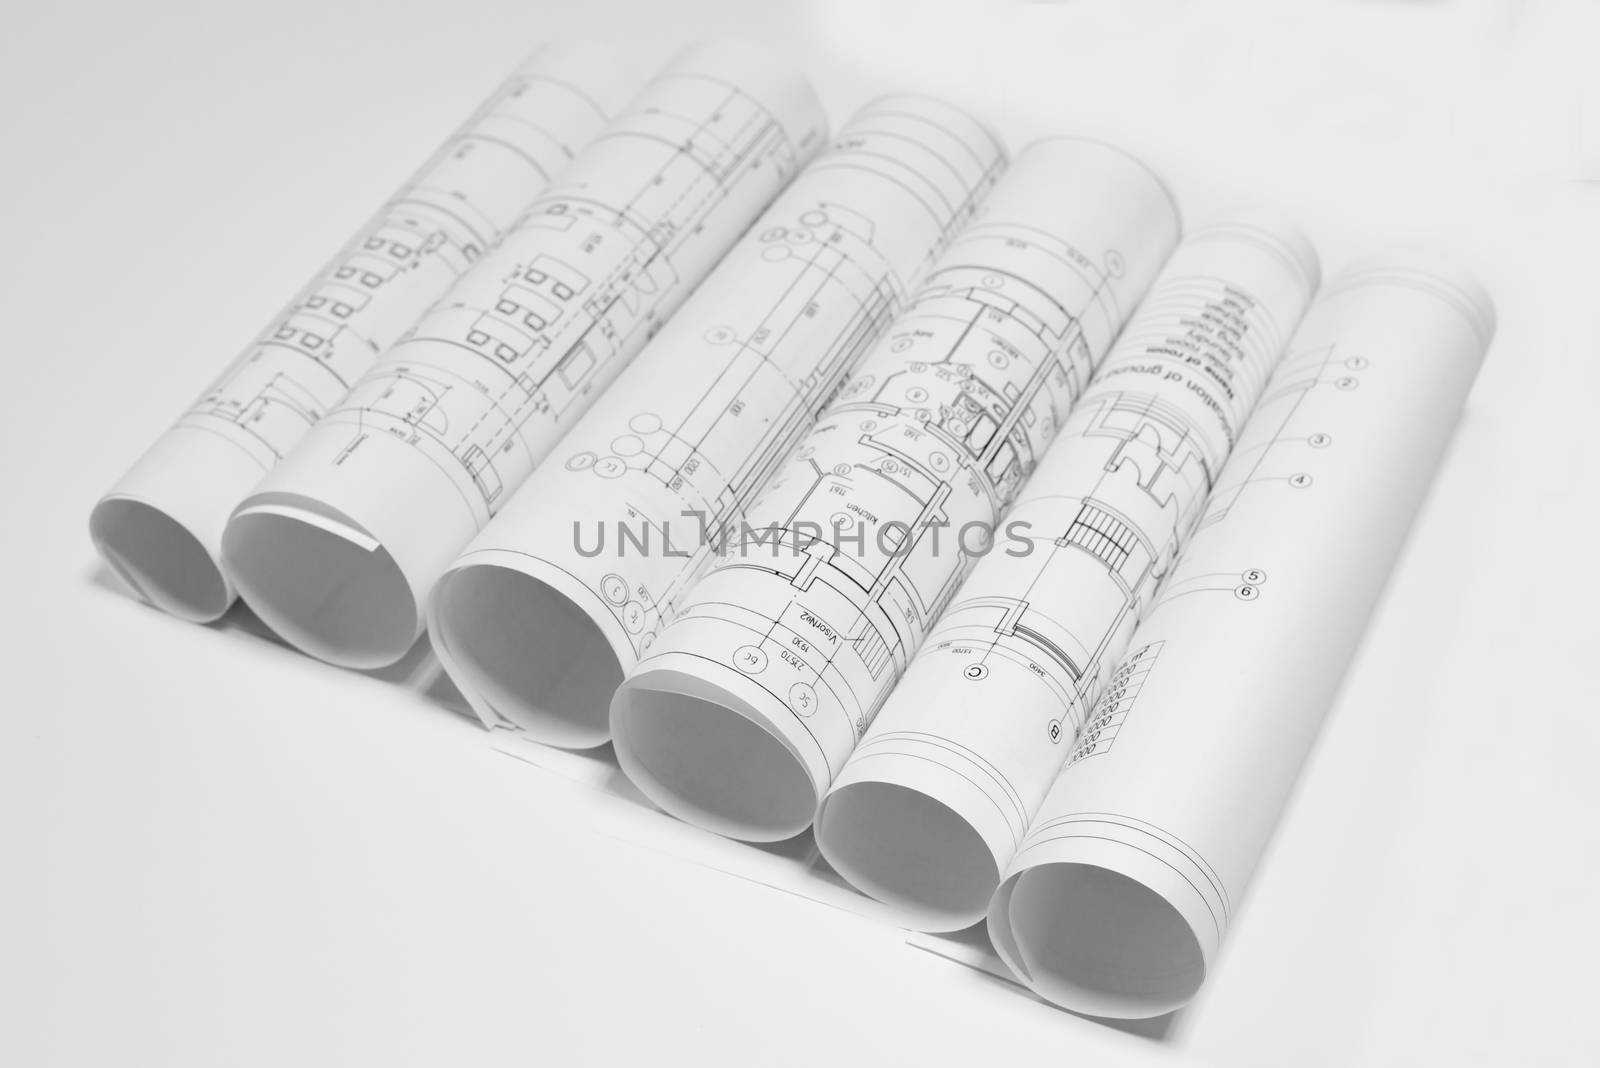 Scrolls architectural drawings on white background. Concept of building